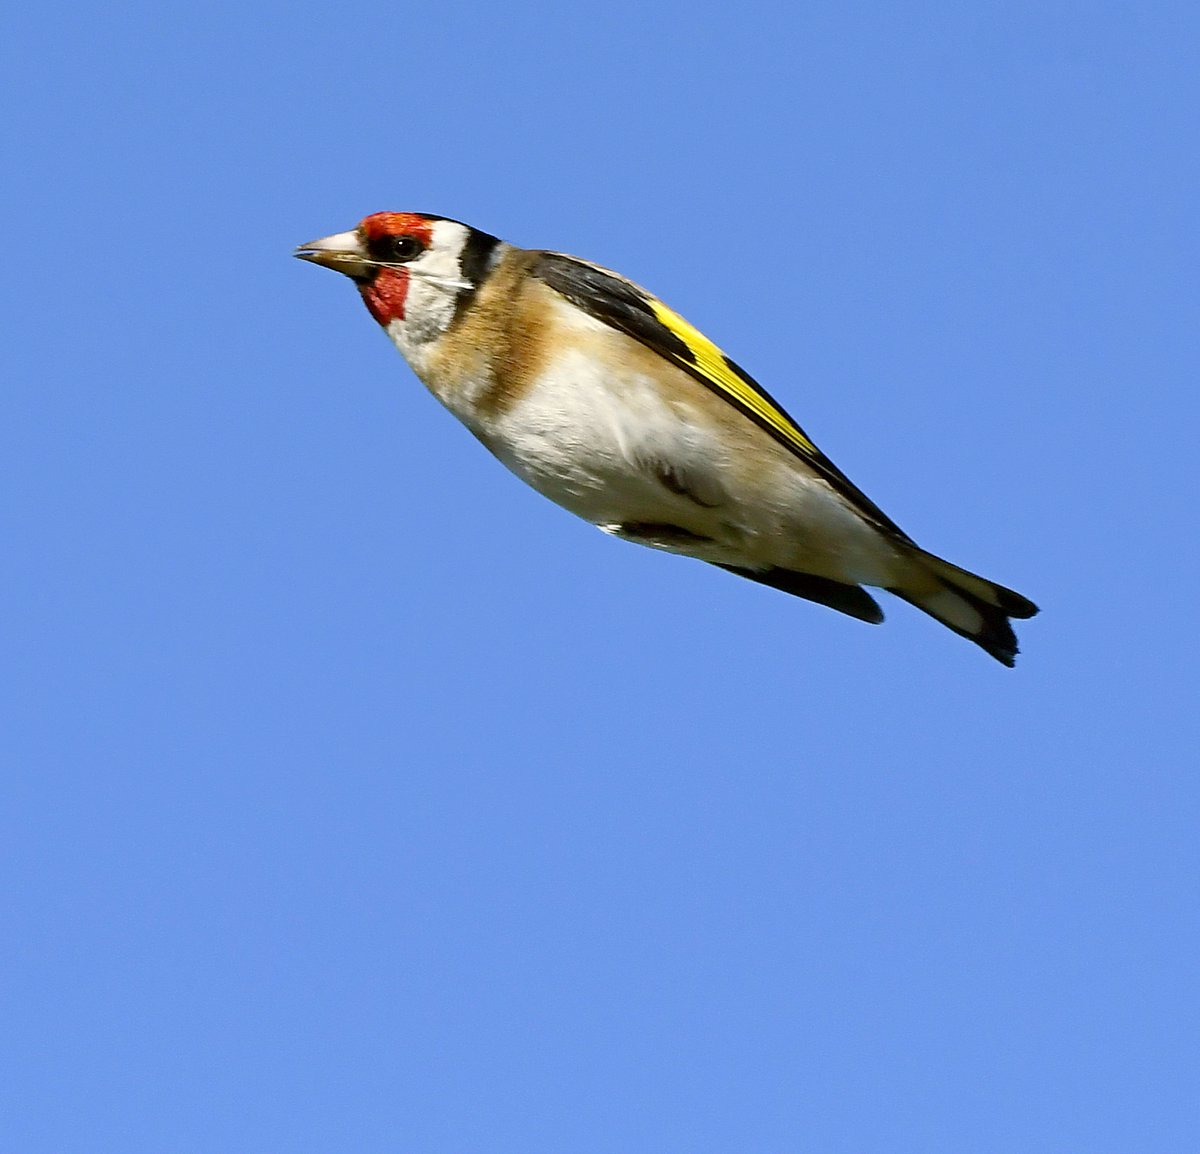 This Goldfinch sailed by a bit too close for comfort! It looks like it had been eating when it was grabbed by my attackers and hurled in my direction.... 